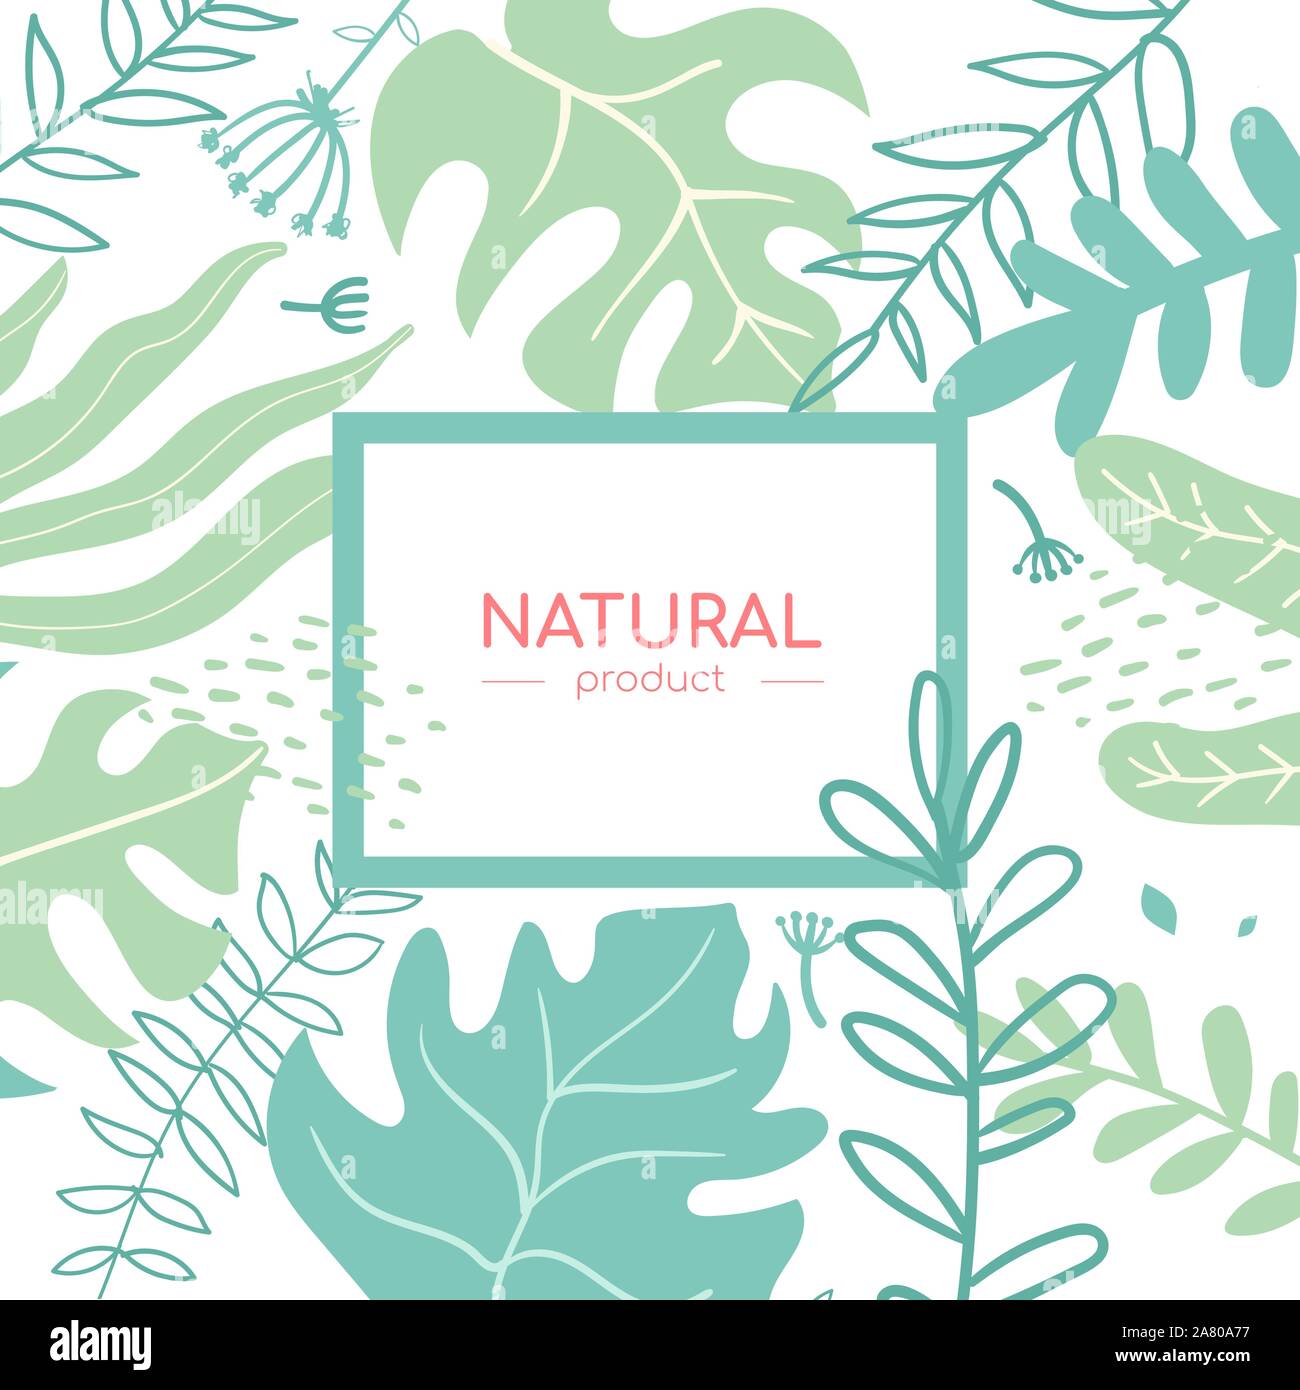 Natural product - modern flat design style abstract banner Stock Vector